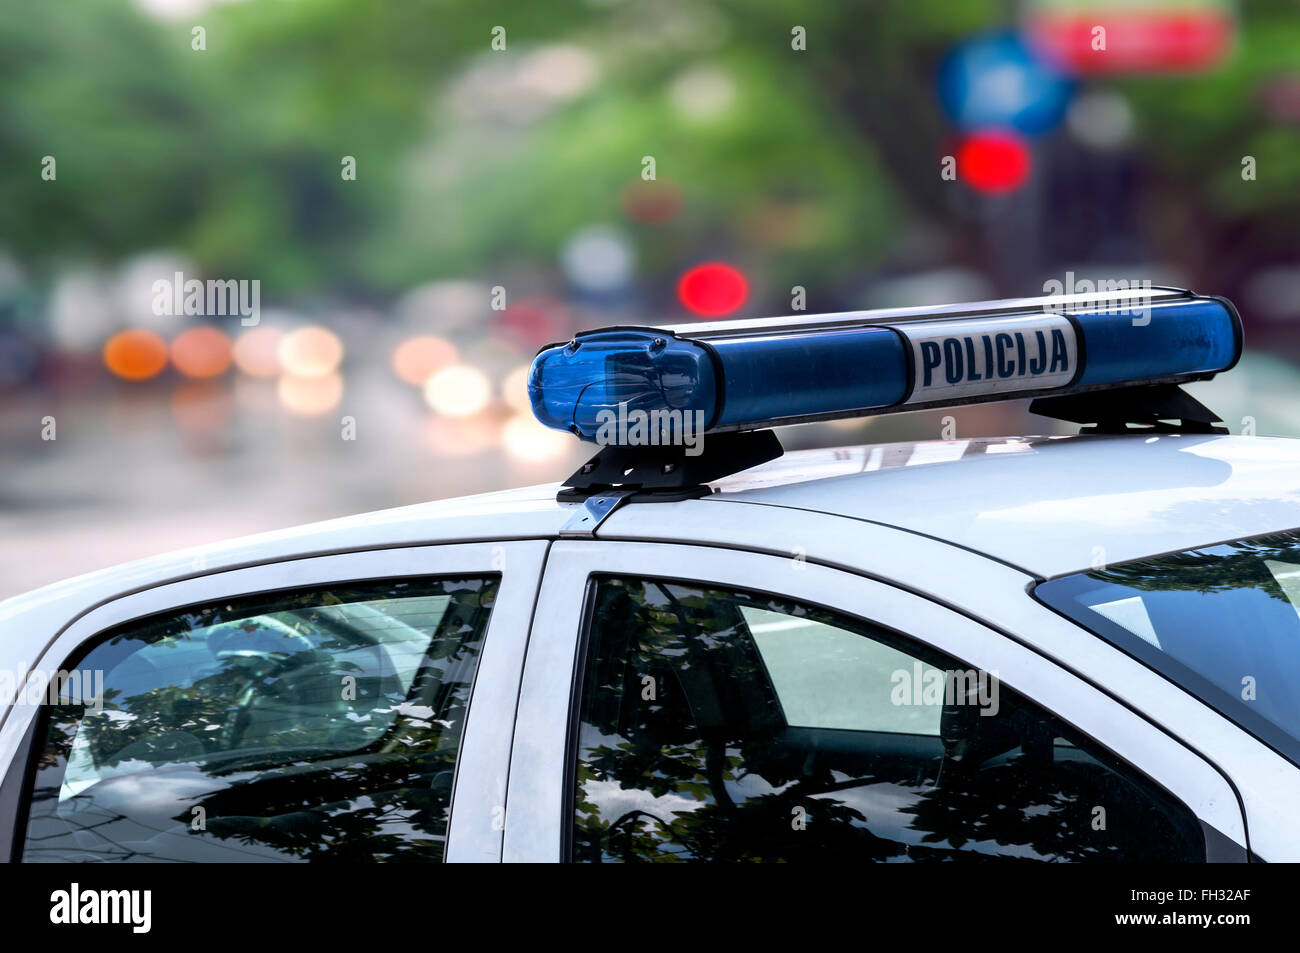 Police officer emergency service car driving street Stock Photo